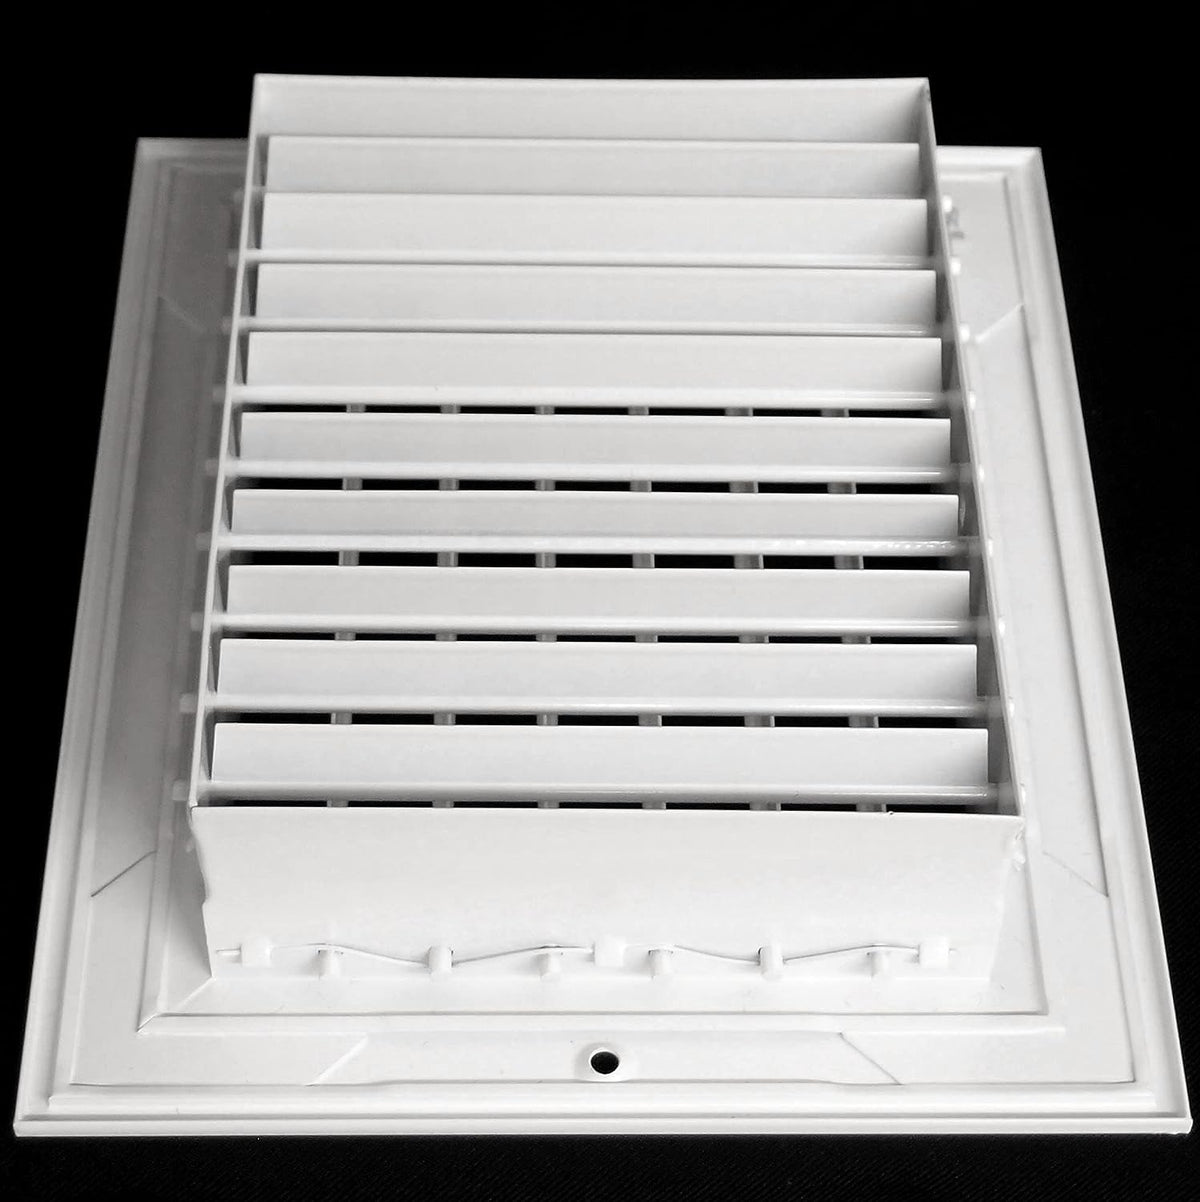 14&quot;w X 10&quot;h Aluminum Double Deflection Adjustable Air Supply HVAC Diffuser - Full Control Vertical/Horizontal Airflow Direction